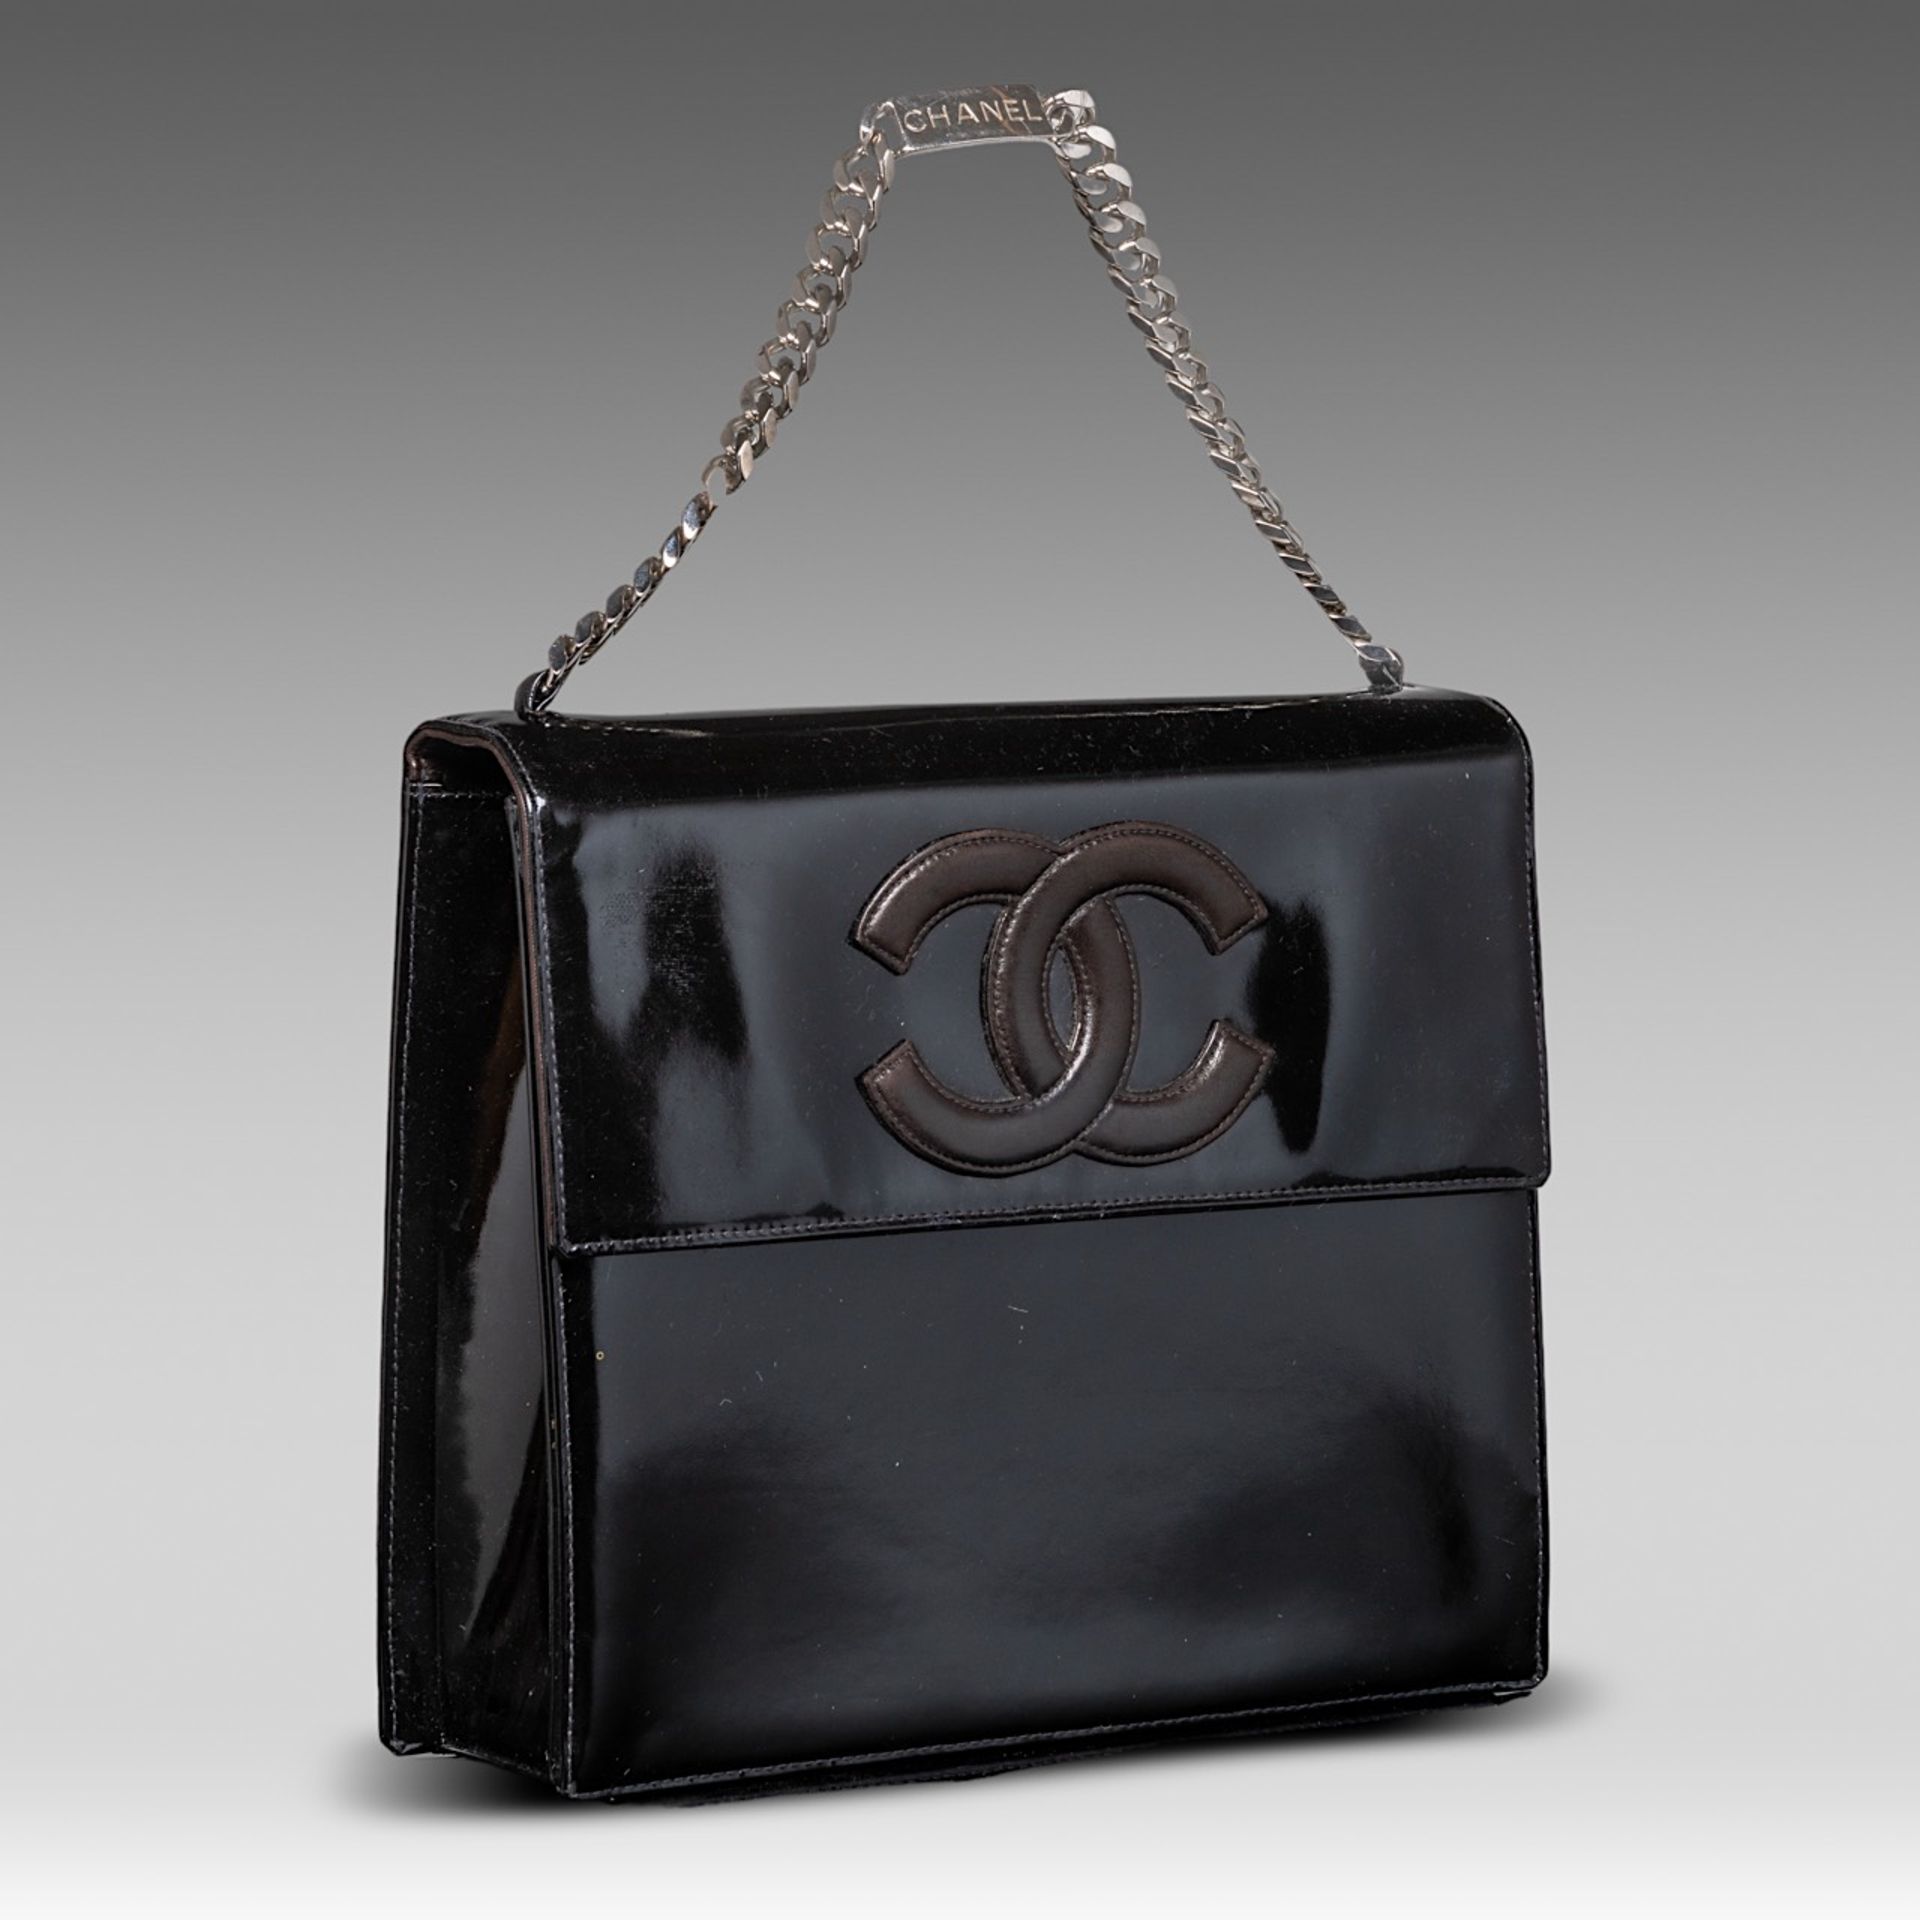 A Chanel flap handbag in black patent leather, H 22 - W 25 - D 8 cm - Image 2 of 10